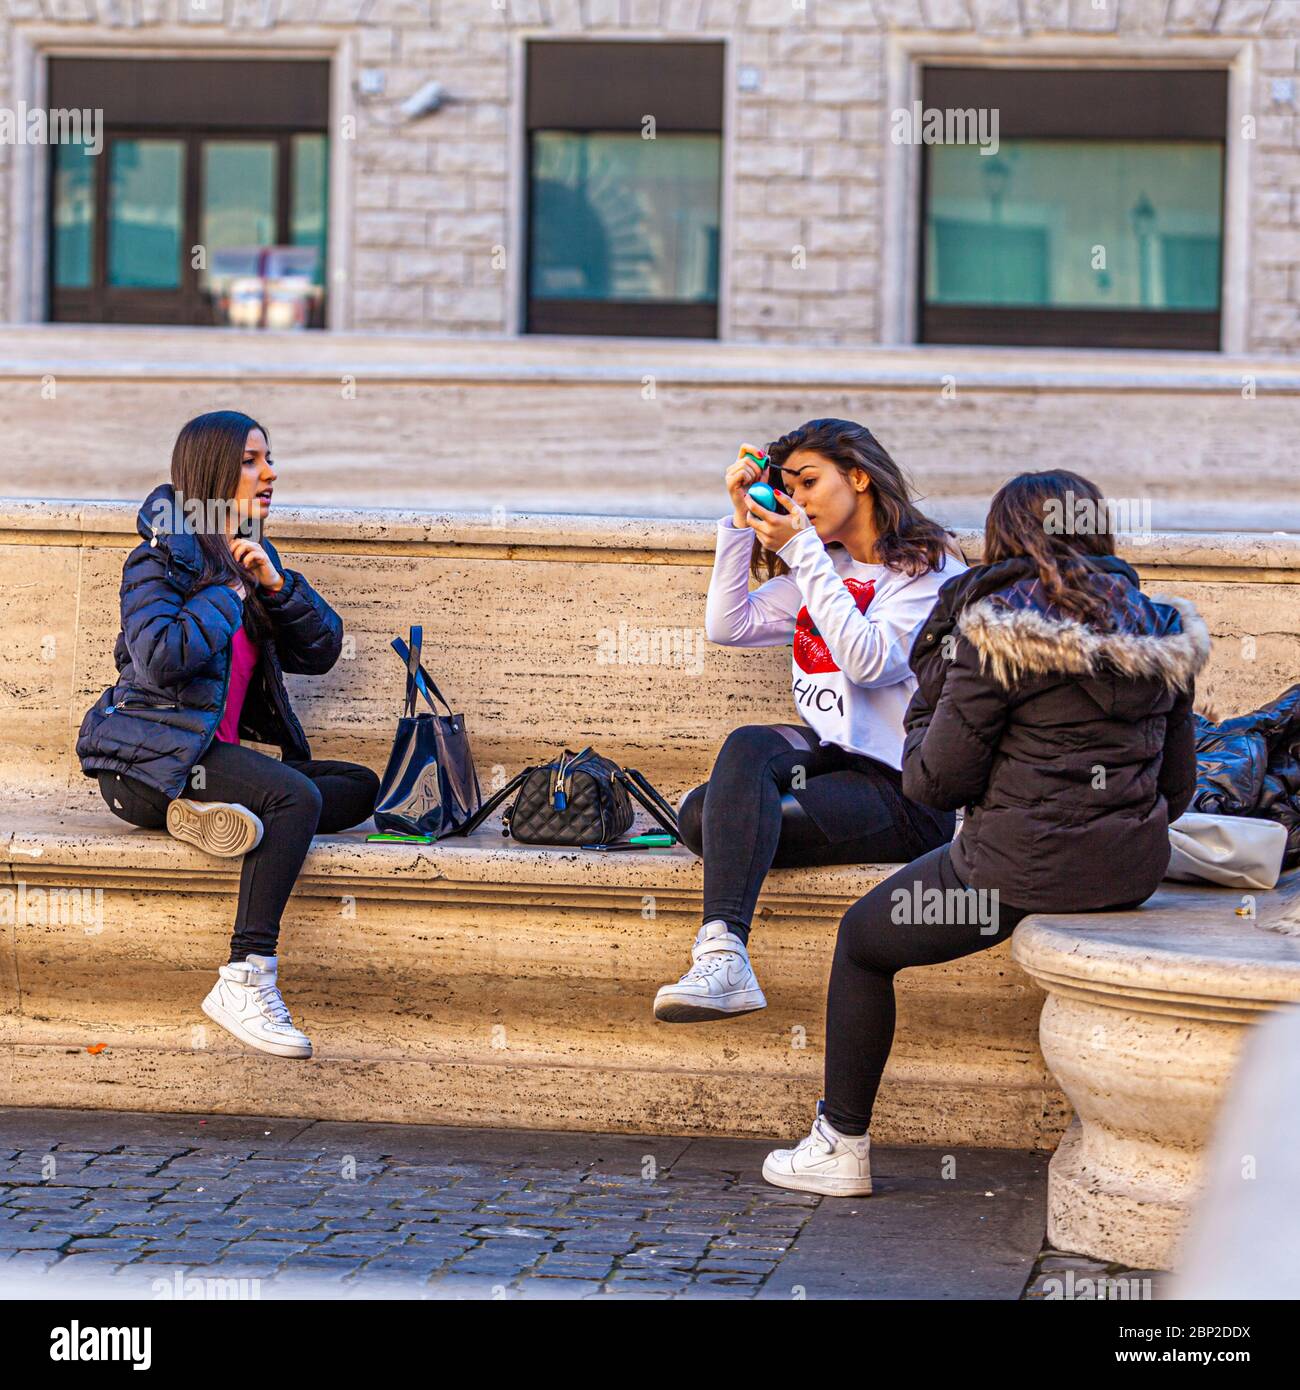 Three girls applying cosmetics on a public bench in Rome, Italy Stock Photo